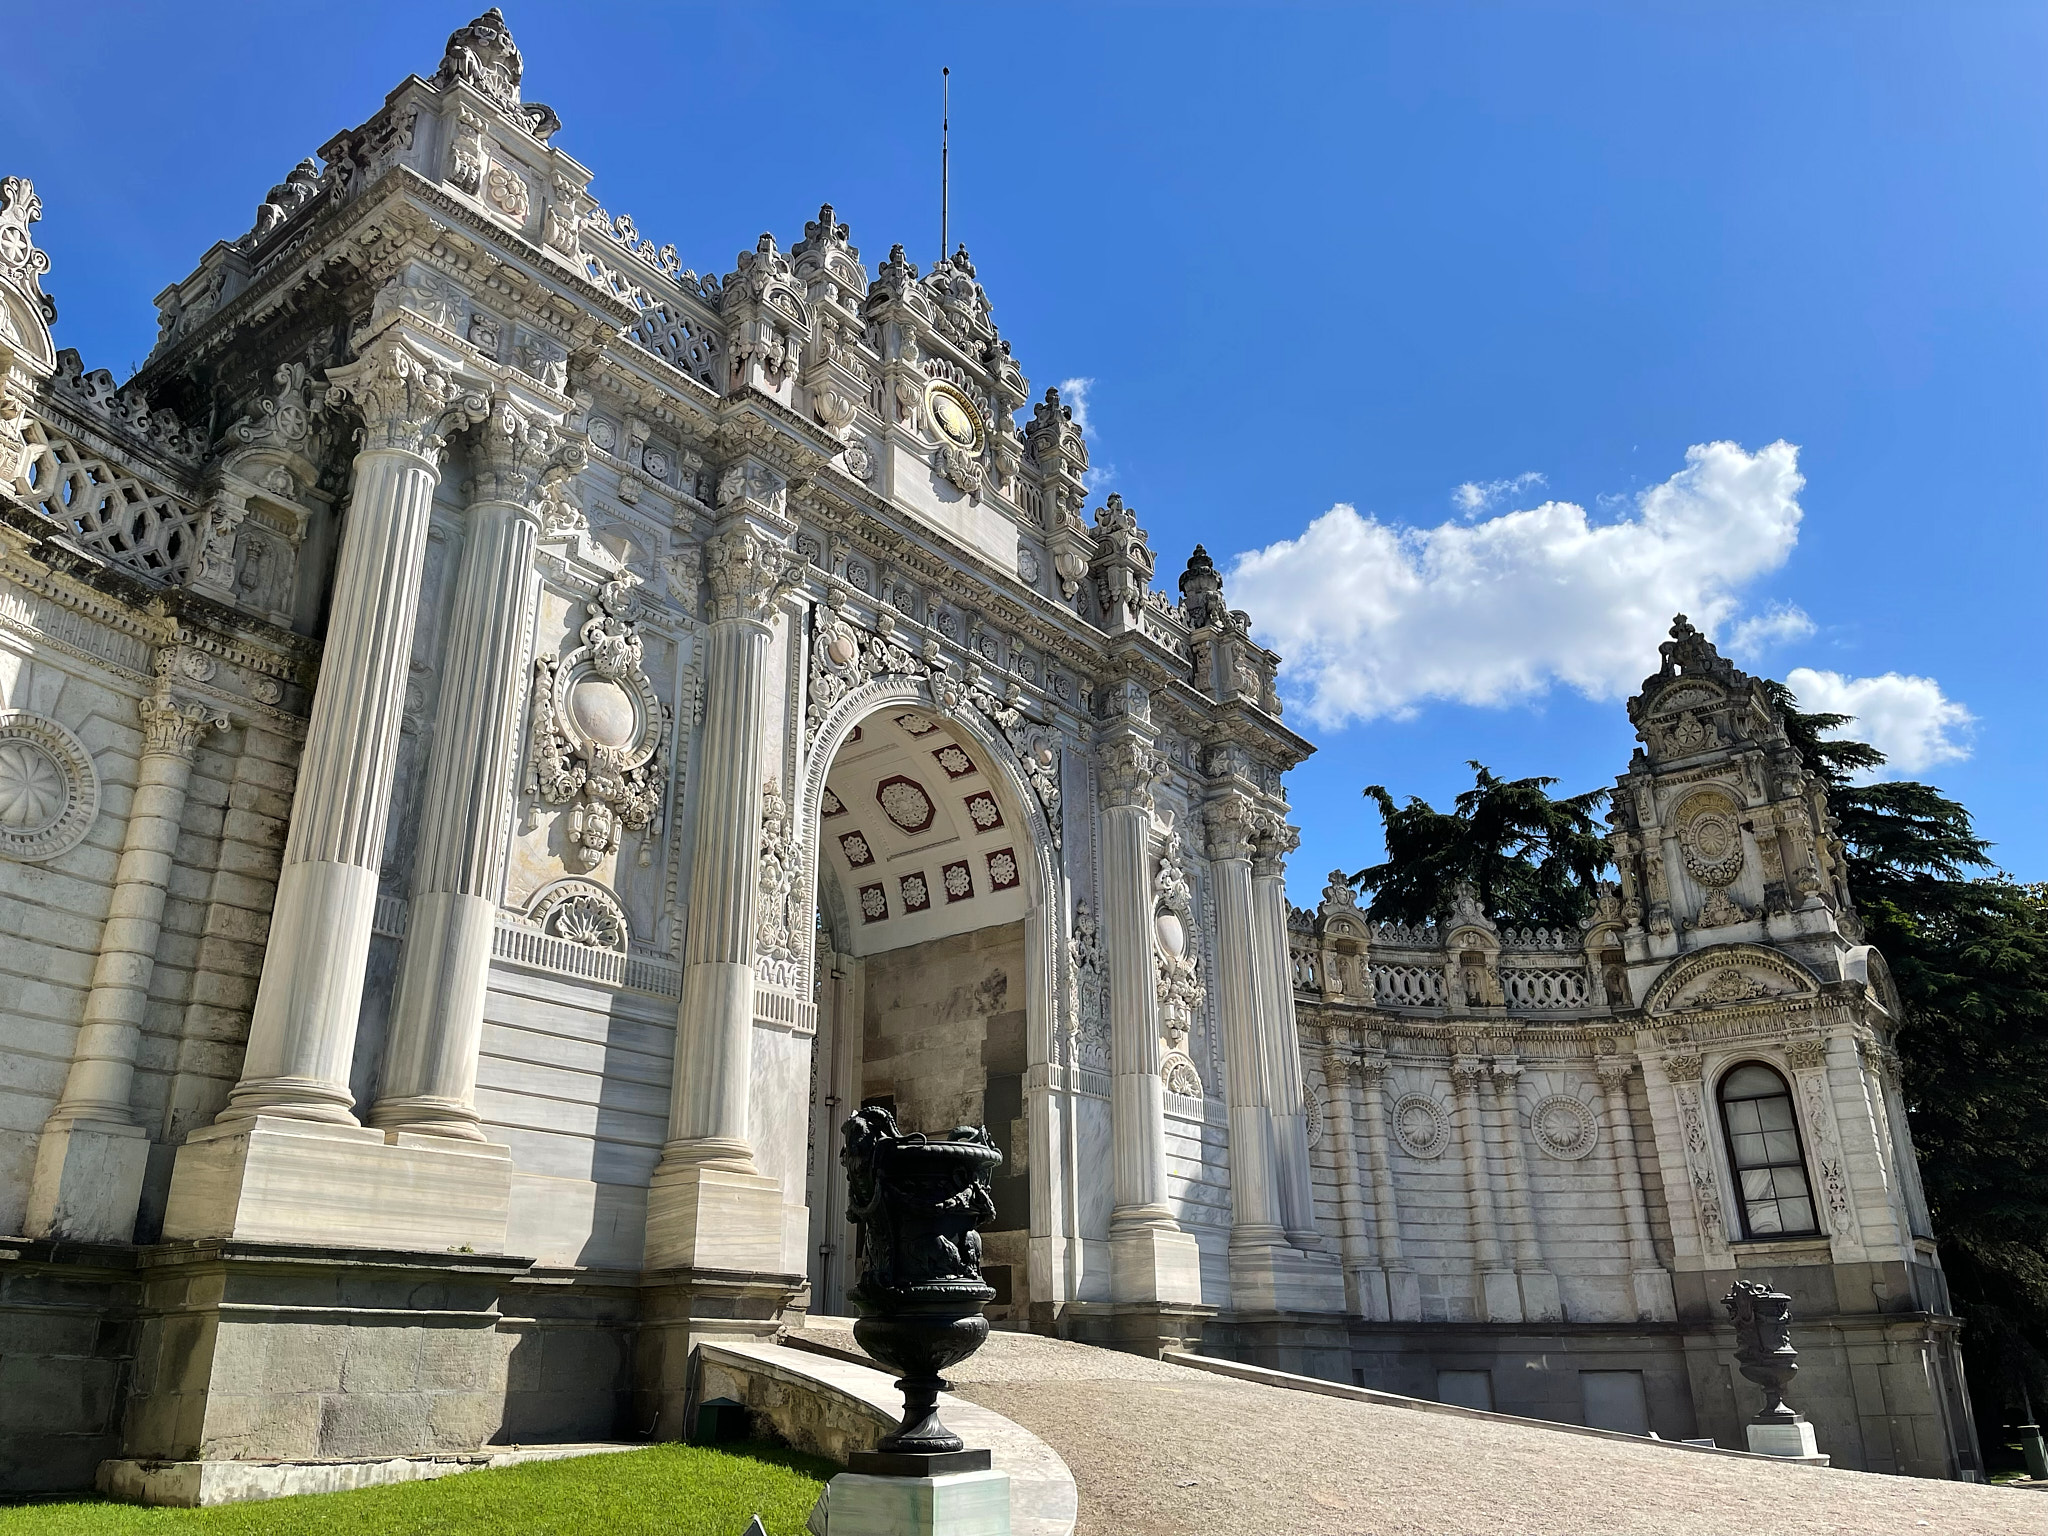 Gate of the Treasury at Dolmabahçe Palace